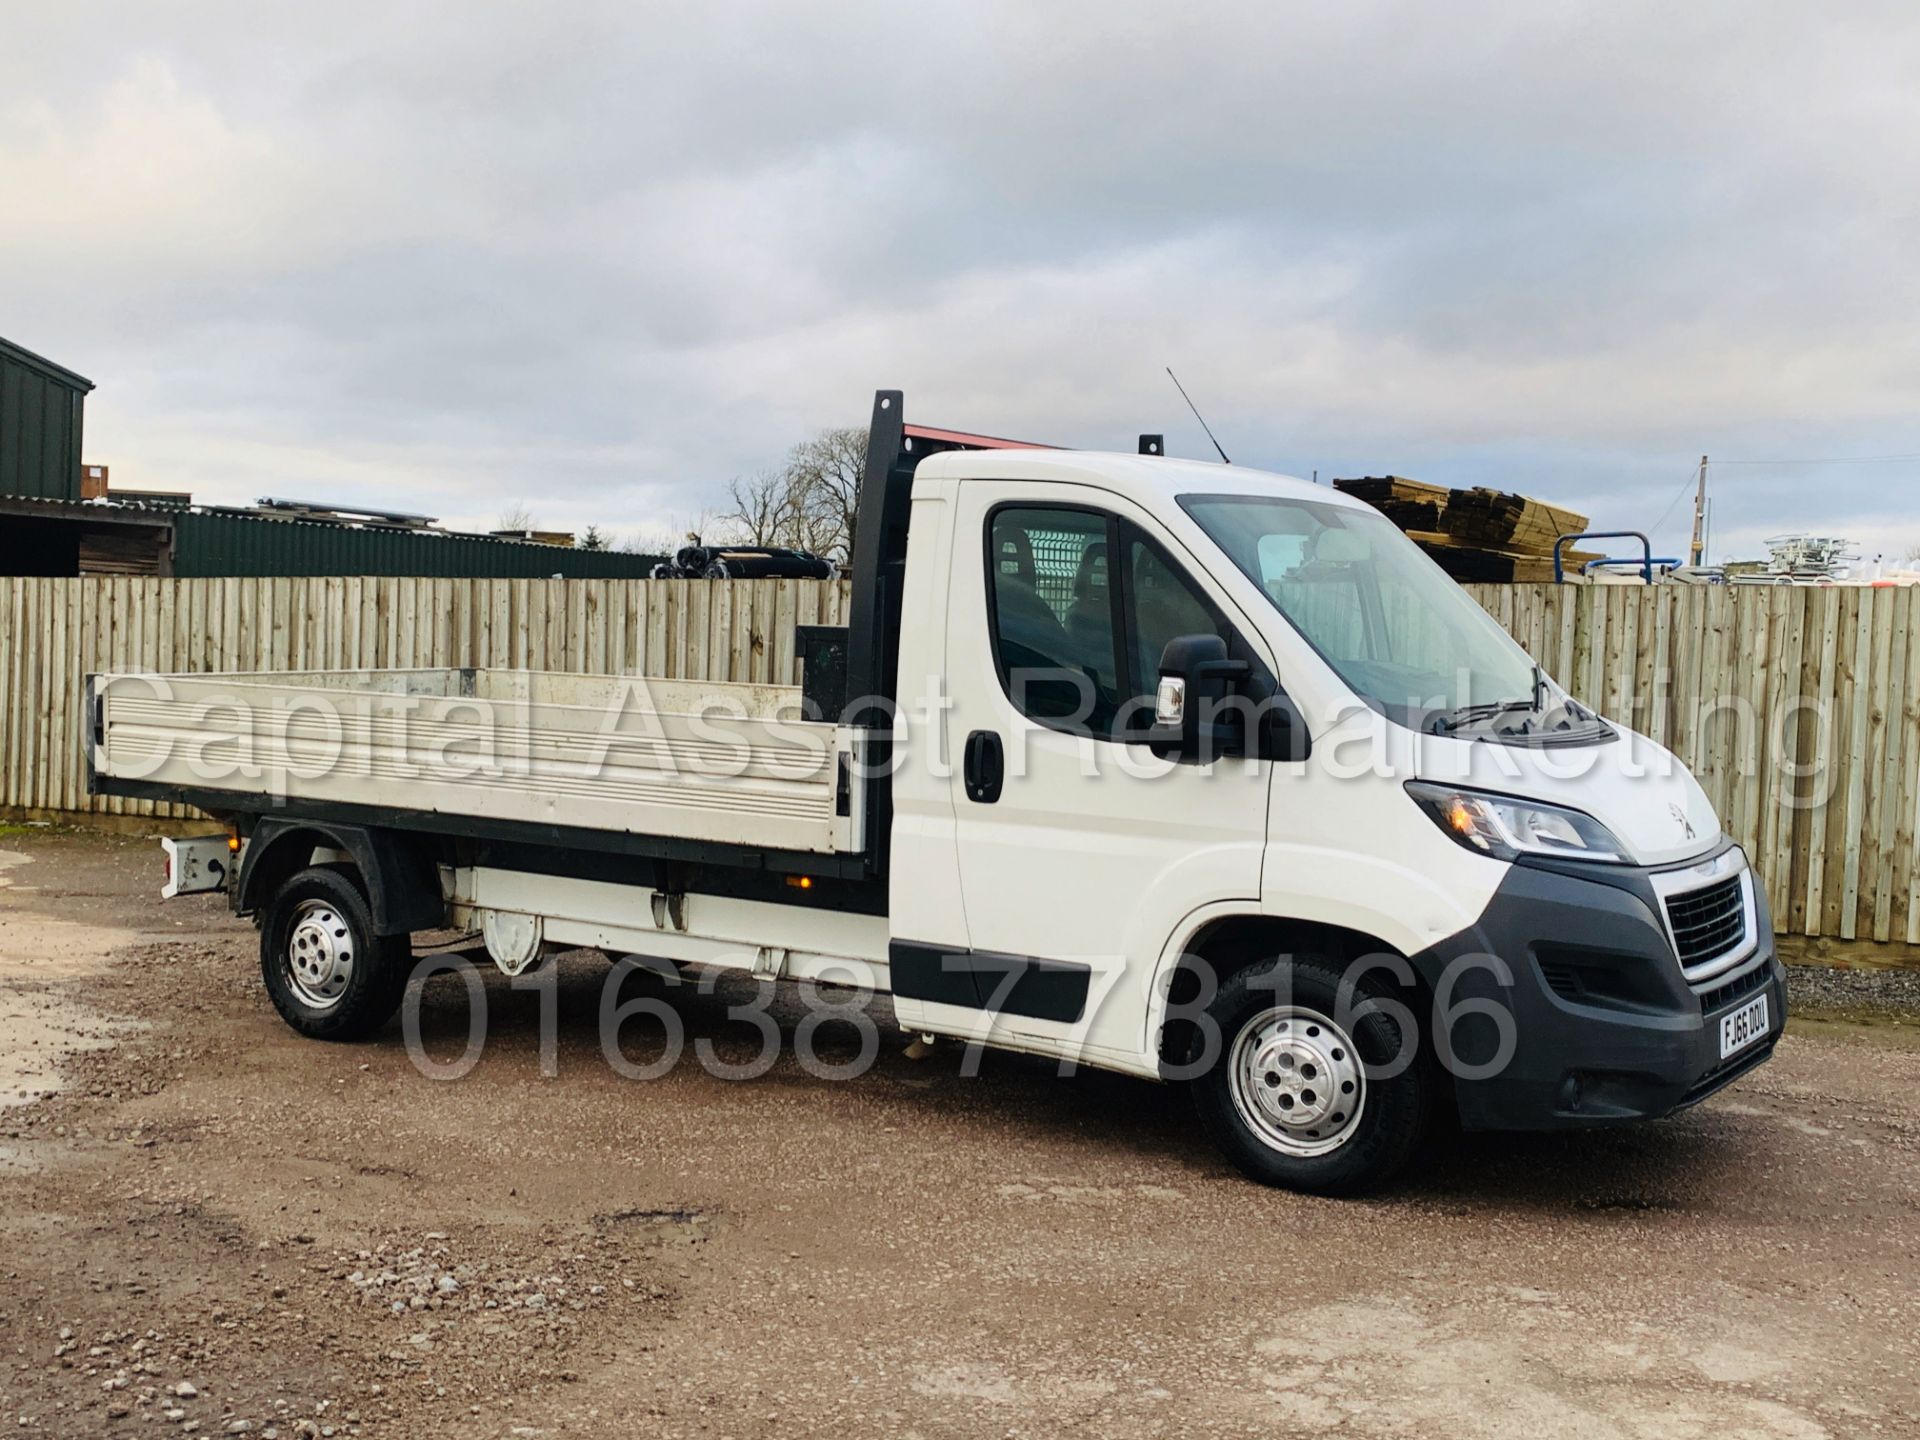 PEUGEOT BOXER *LWB - DROPSIDE TRUCK* (2017 - EURO 6 MODEL) '2.0 HDI - 6 SPEED' *ONLY 45,000 MILES*